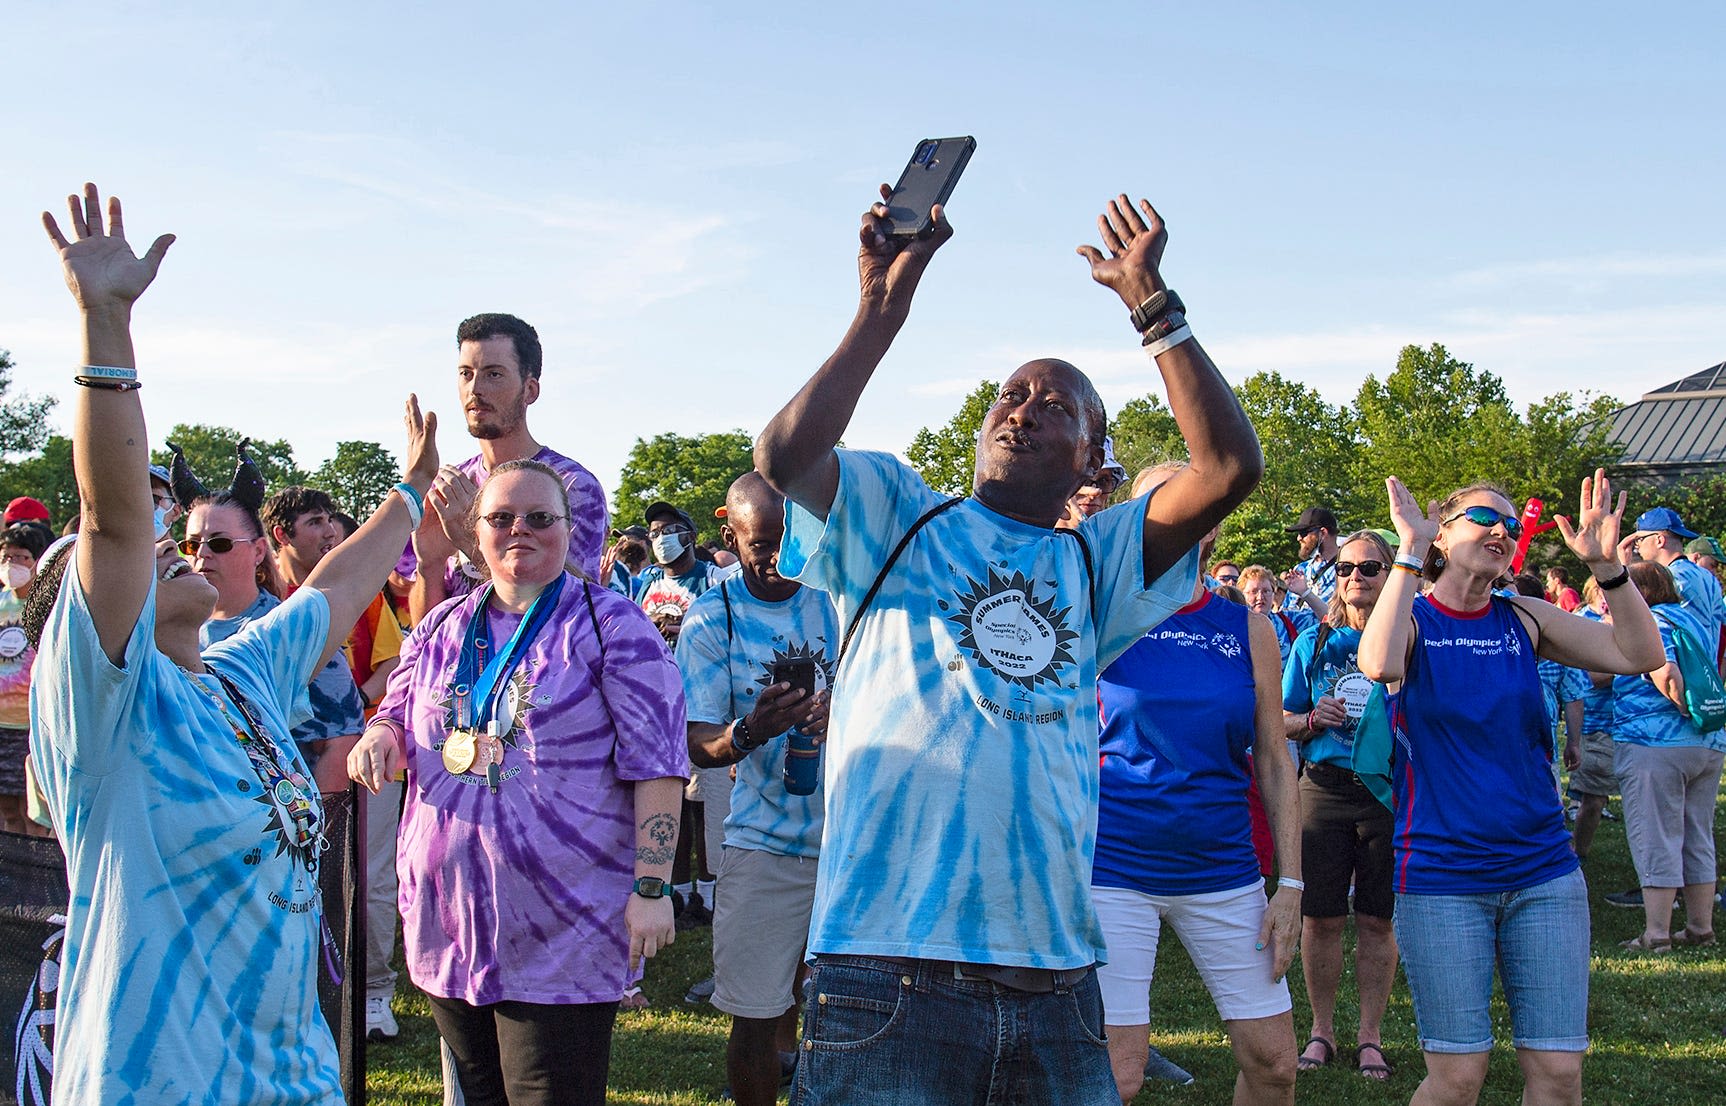 Special Olympics brings its Summer Games back to Ithaca next month